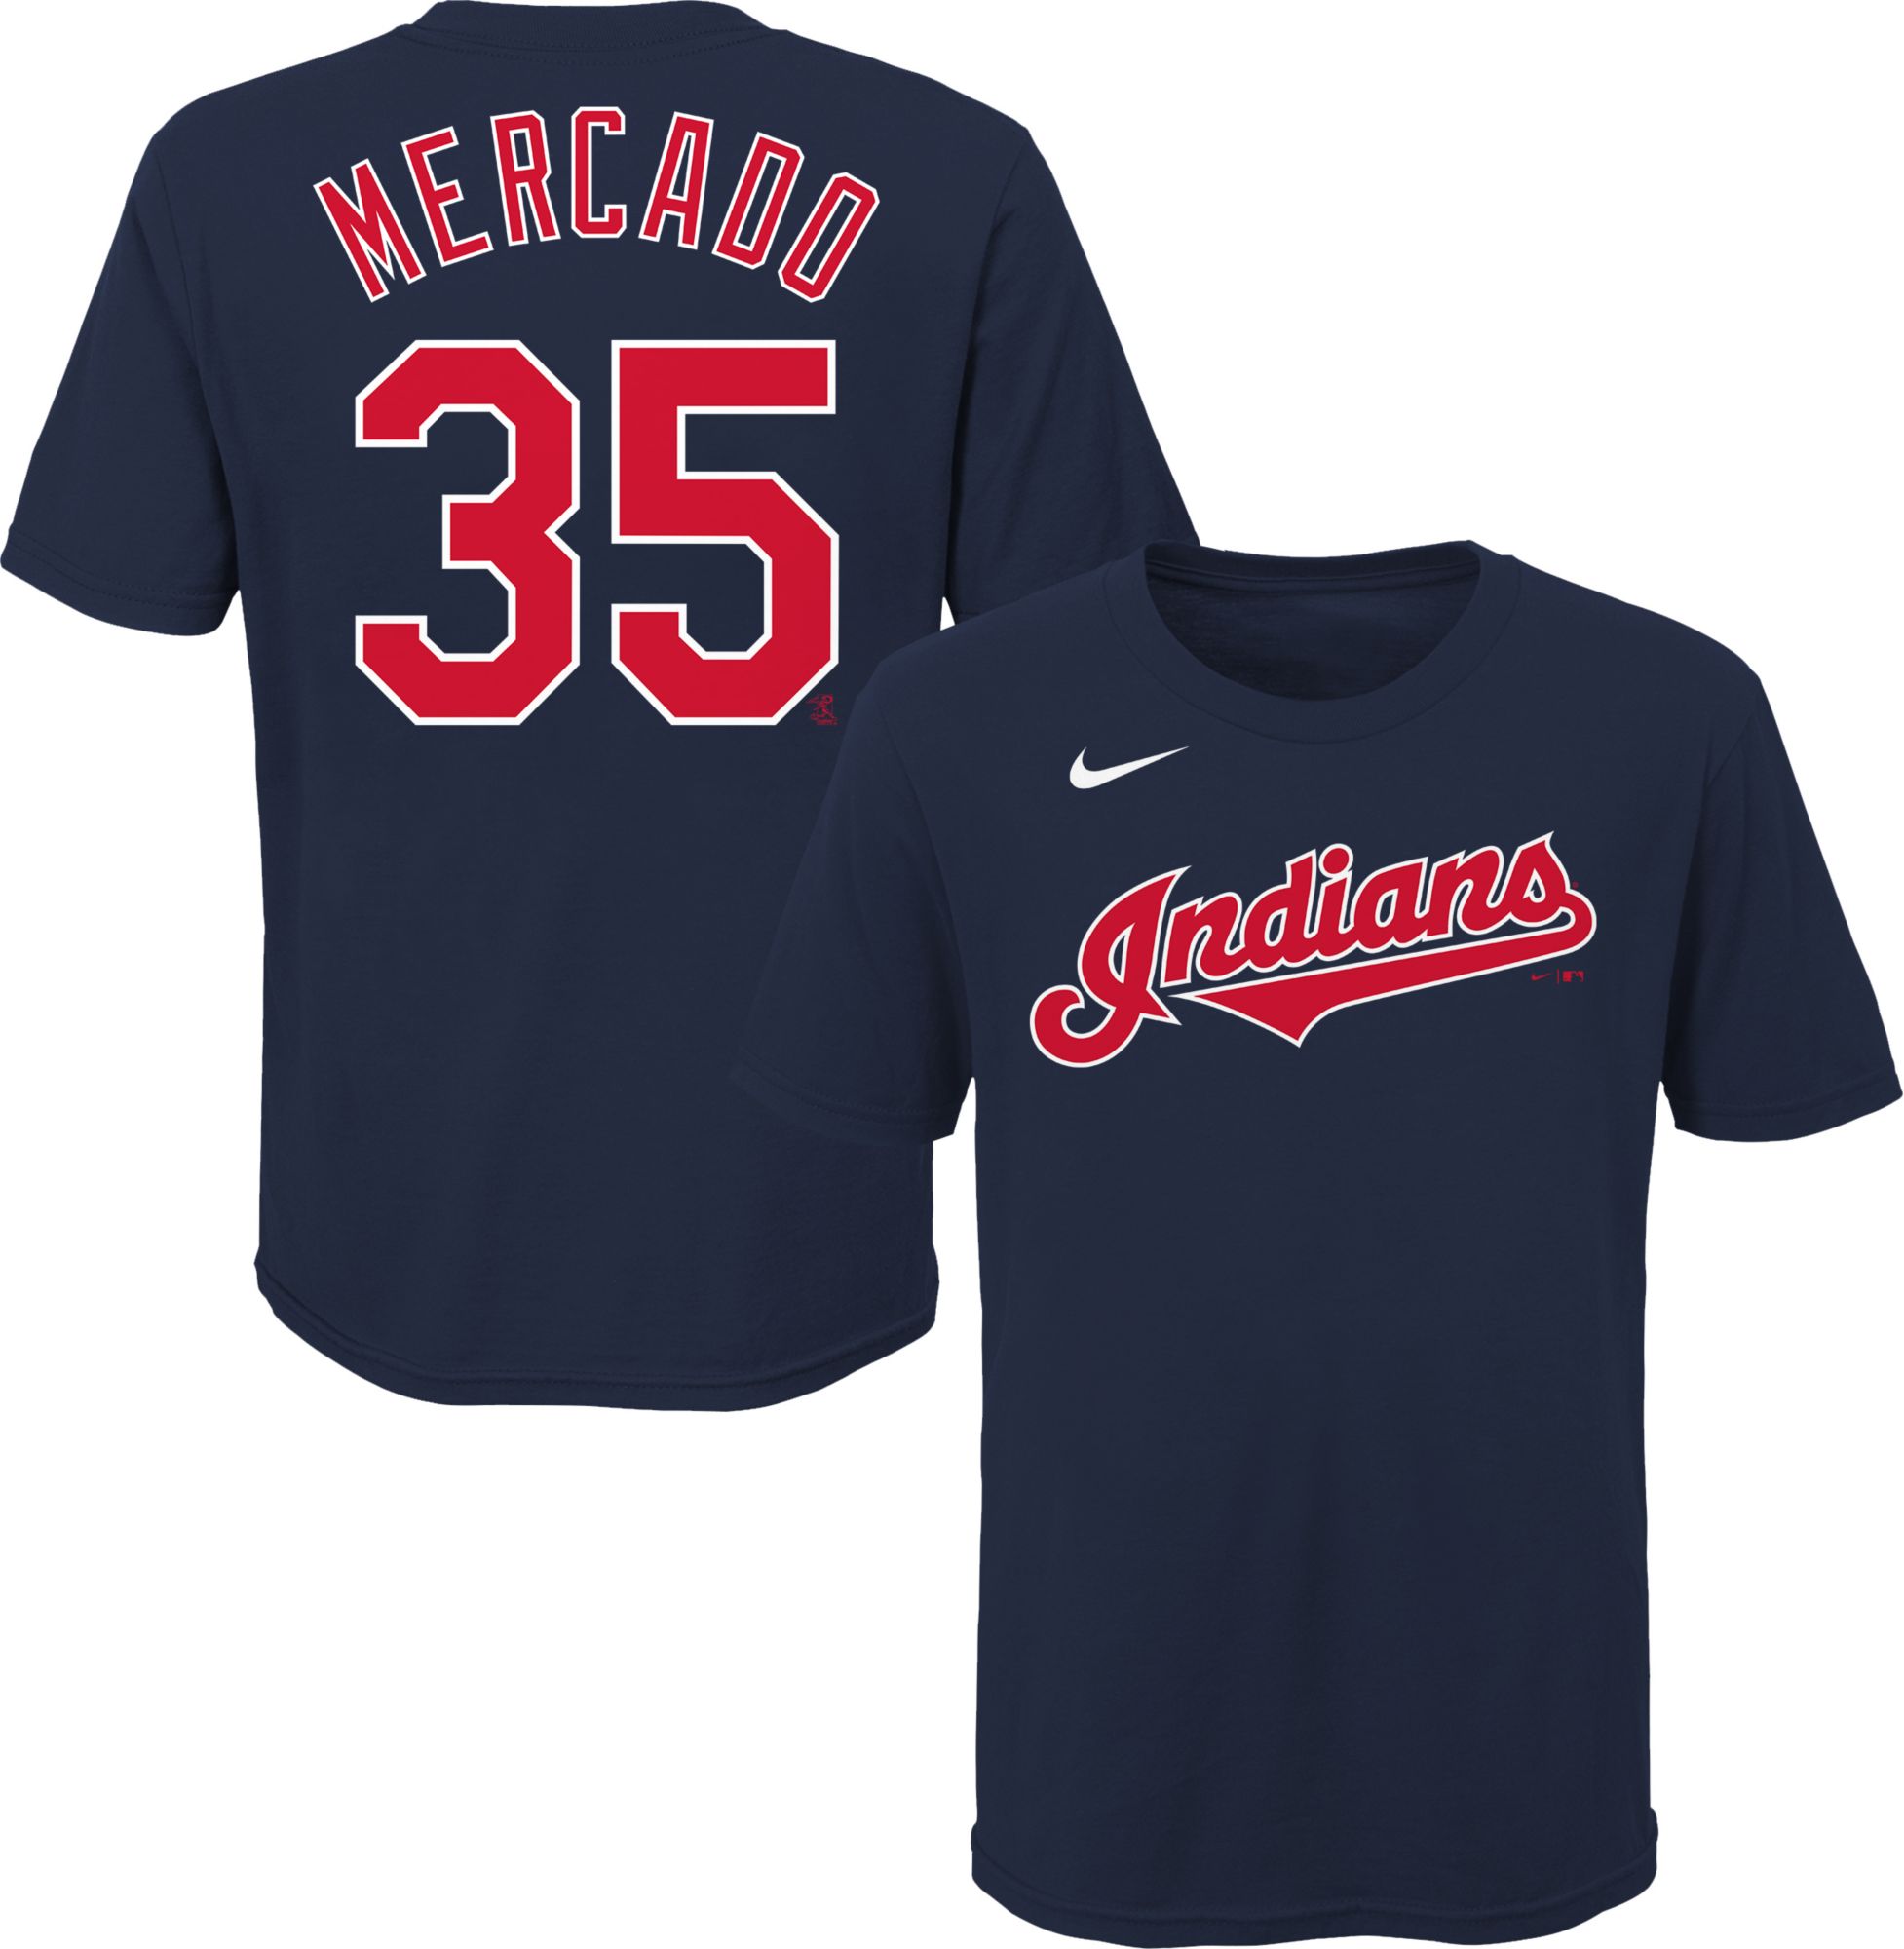 First look: Cleveland Indians' new Nike jersey